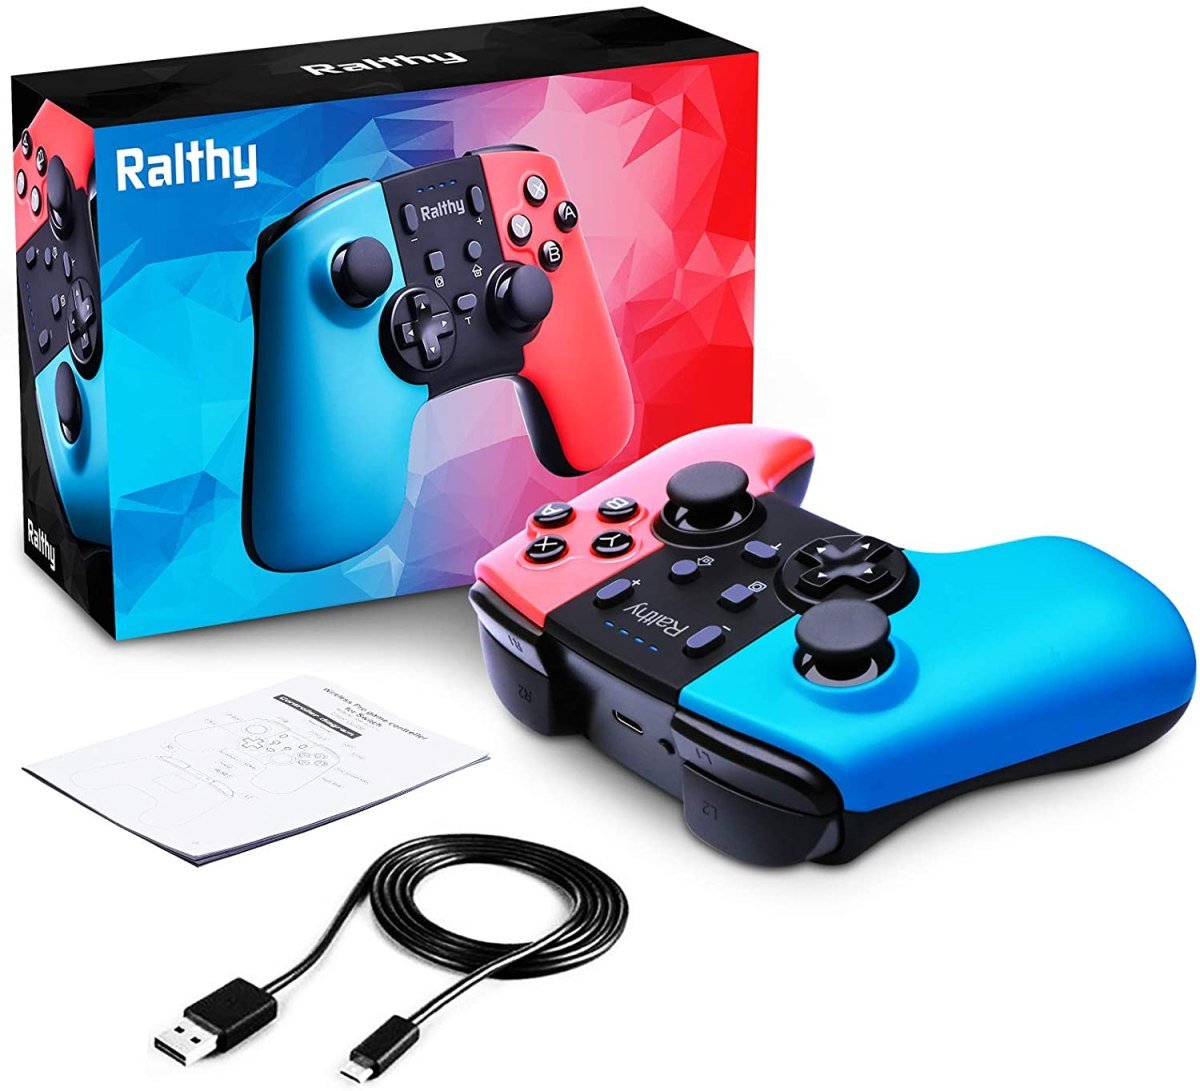 42% off Ralthy Wireless Pro Controller